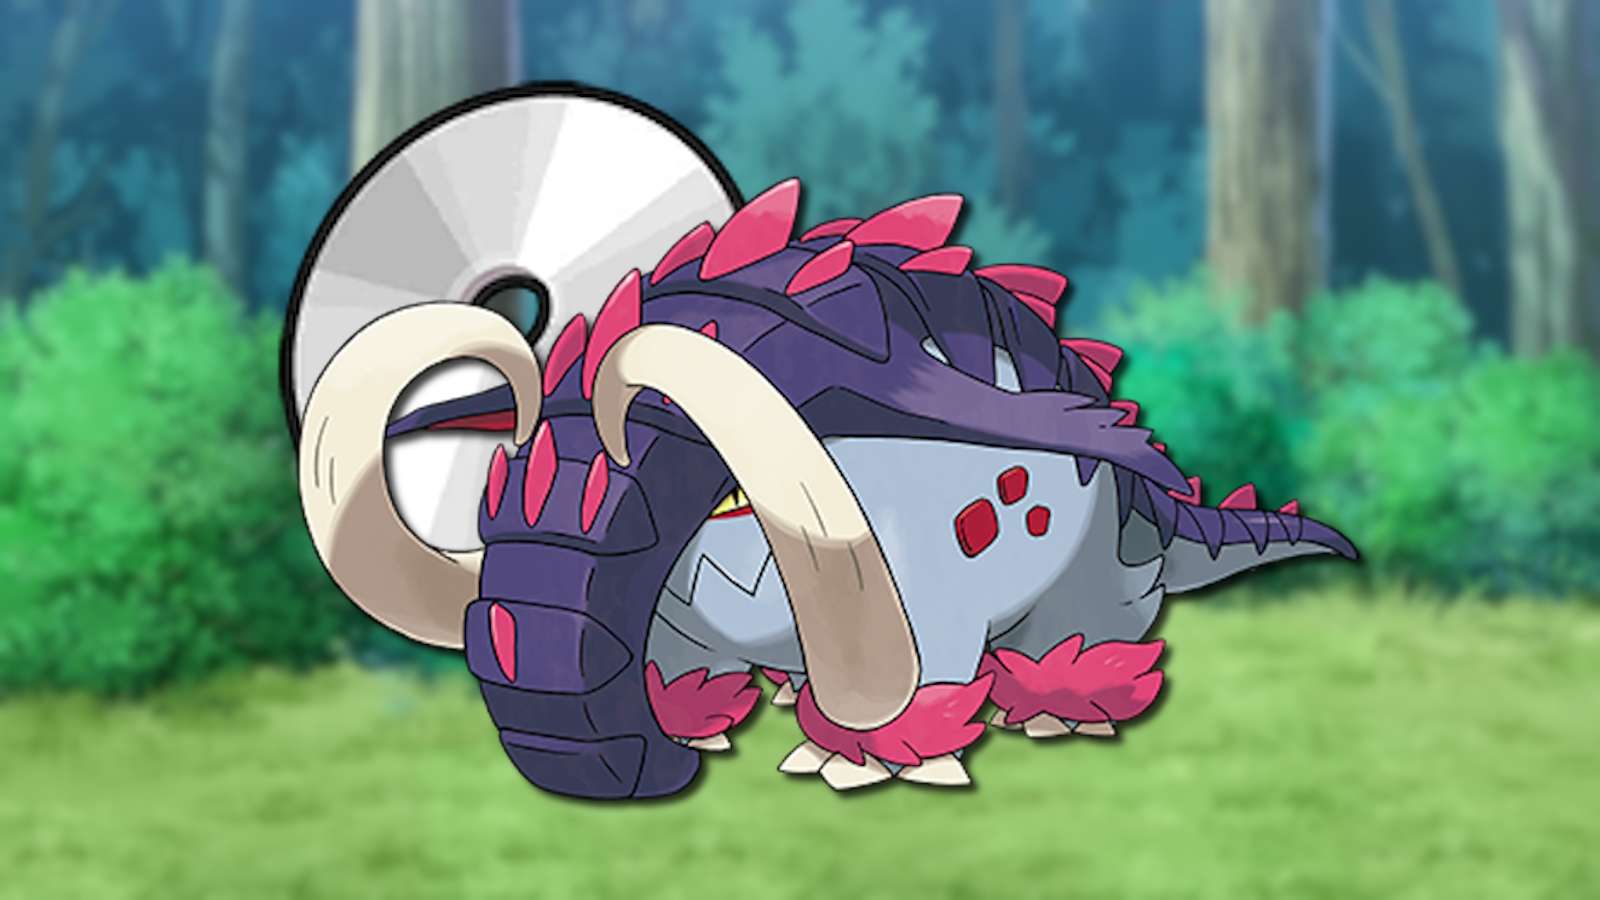 Paradox Pokemon Great Tusk about to use TM in Scarlet & Violet.